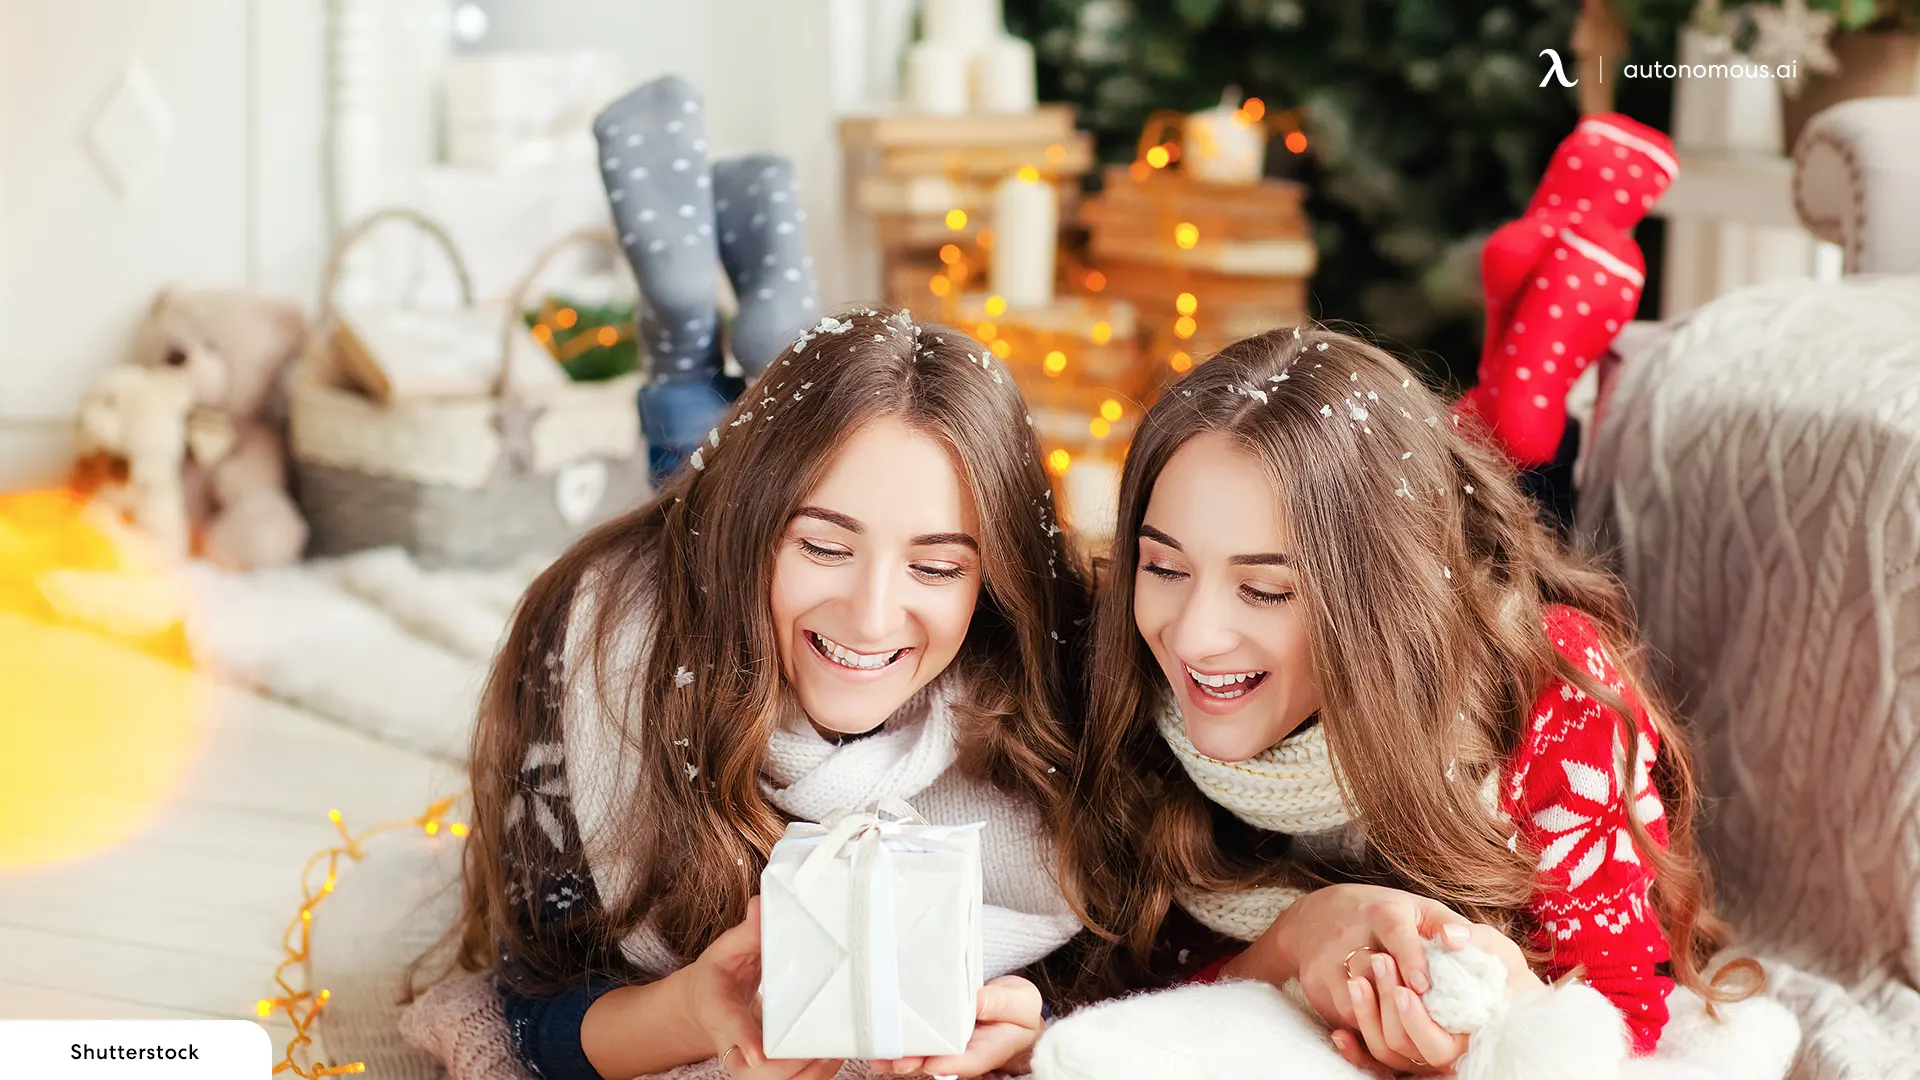 What to Consider When Choosing a Christmas Gift for Siblings